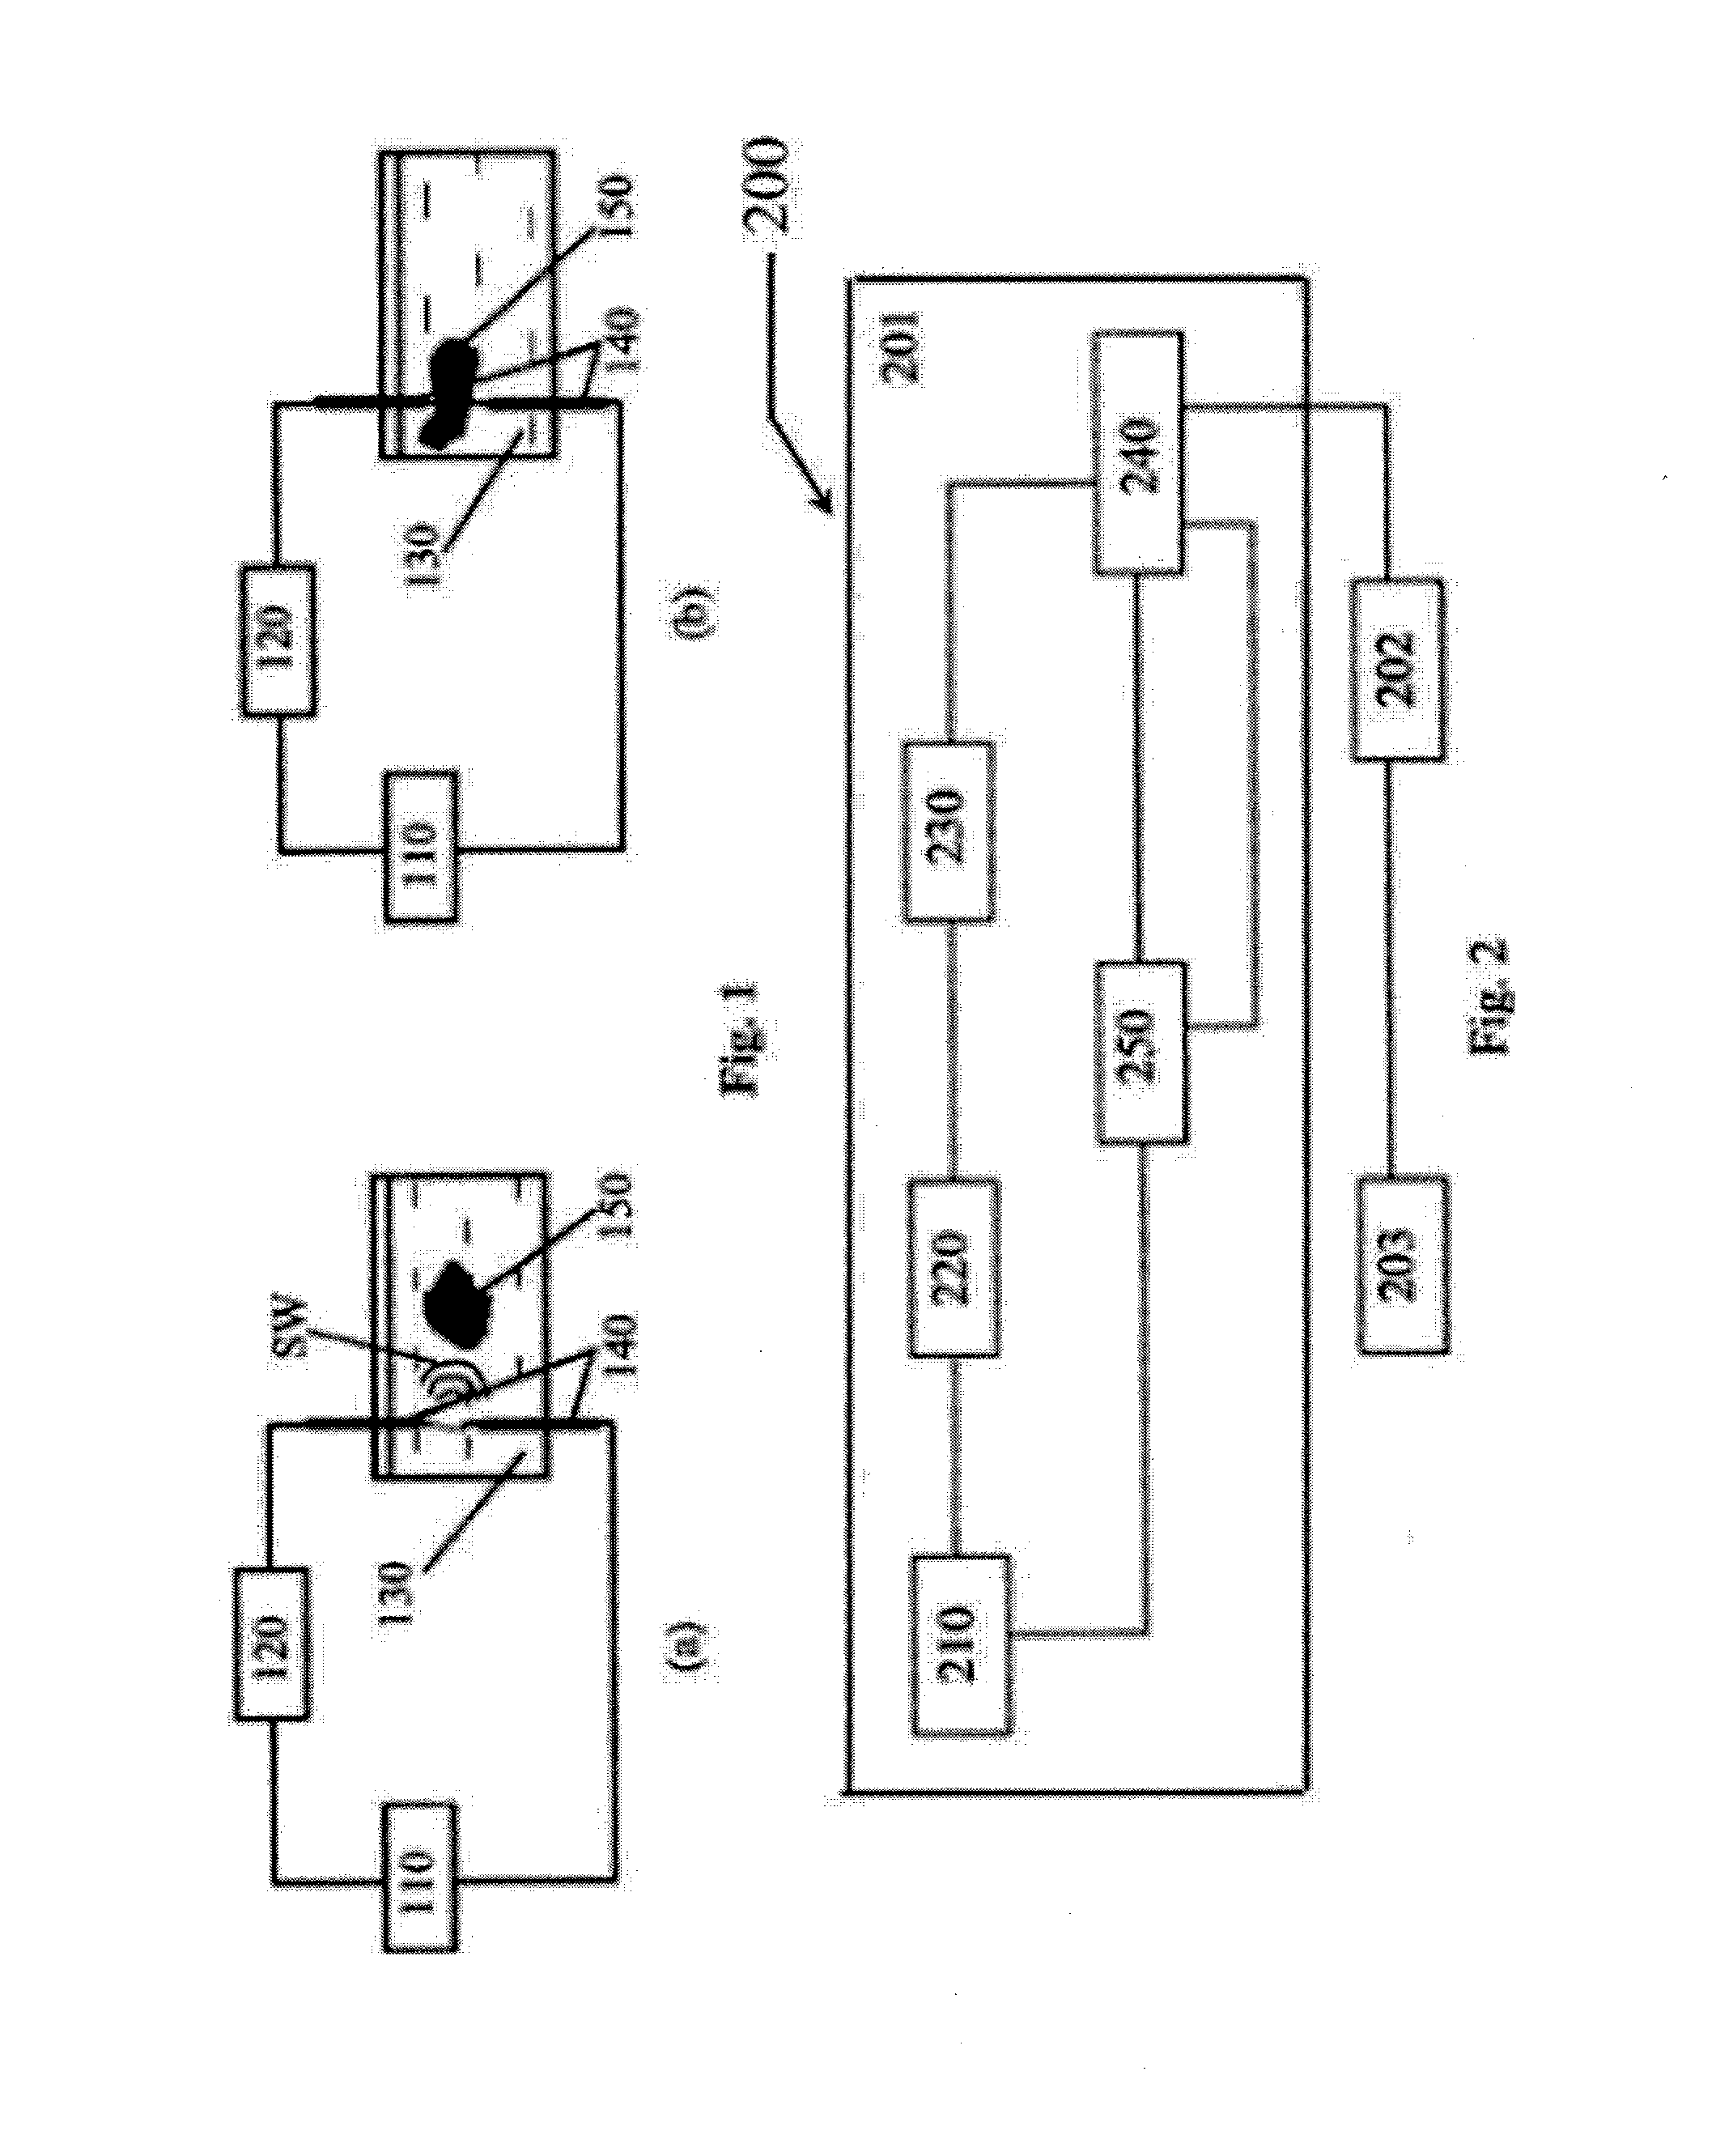 Method for intracorporeal lithotripsy fragmentation and apparatus for its implementation